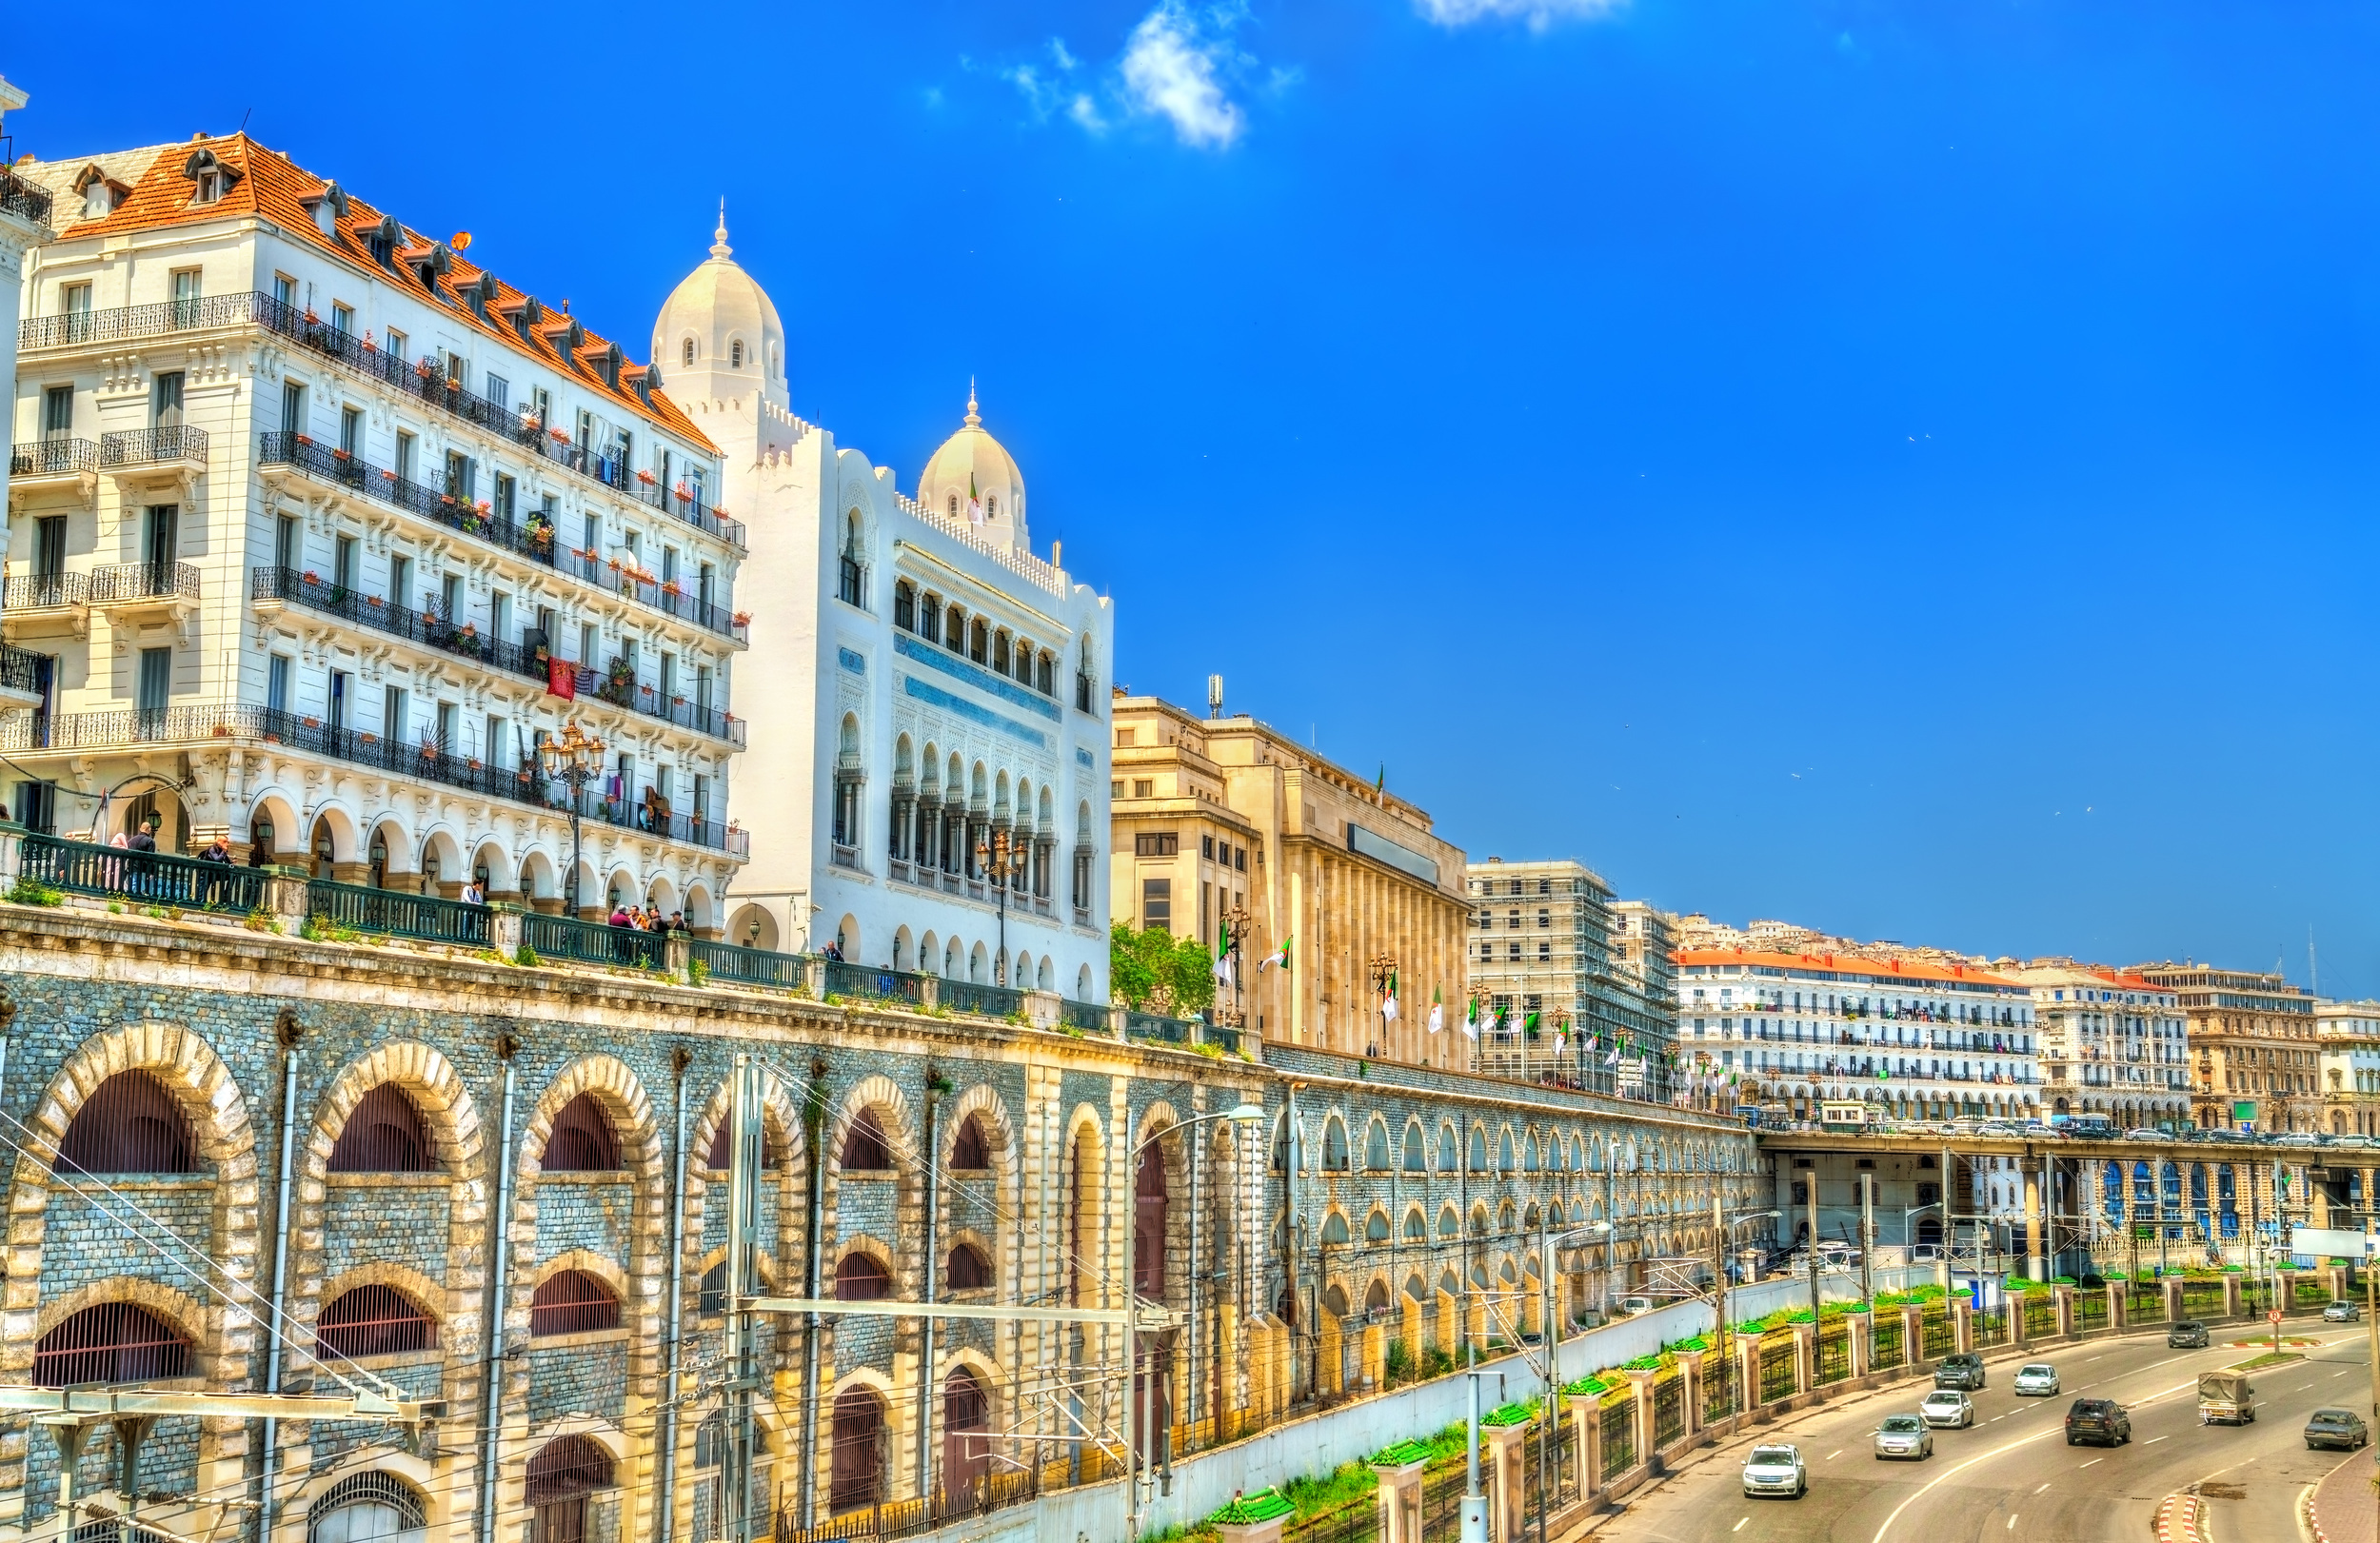 <p>Algeria’s official languages are Arabic and Berber, but French is also commonly understood. While not as widely used as in neighboring Morocco, it will be your best bet if you don’t speak one of the official languages. </p><p>You may also like: <a href='https://www.yardbarker.com/lifestyle/articles/15_amazing_train_rides_across_the_us/s1__39017192'>15 amazing train rides across the US</a></p>